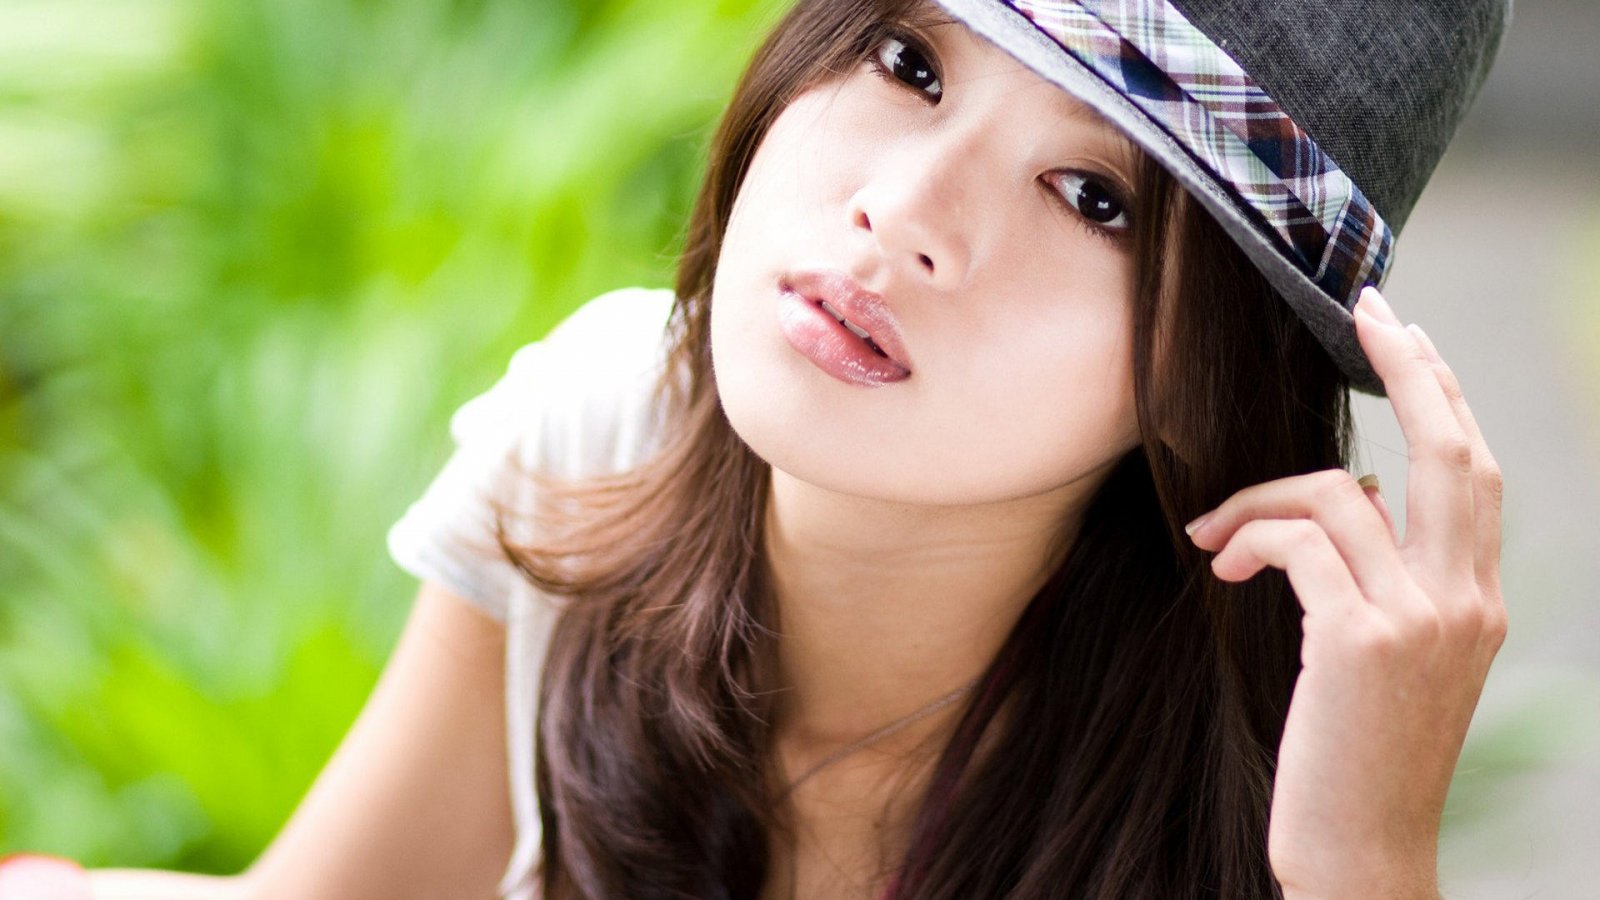 Girl Wallpapers Free Download Group - Free Girl Photo Download - HD Wallpaper 